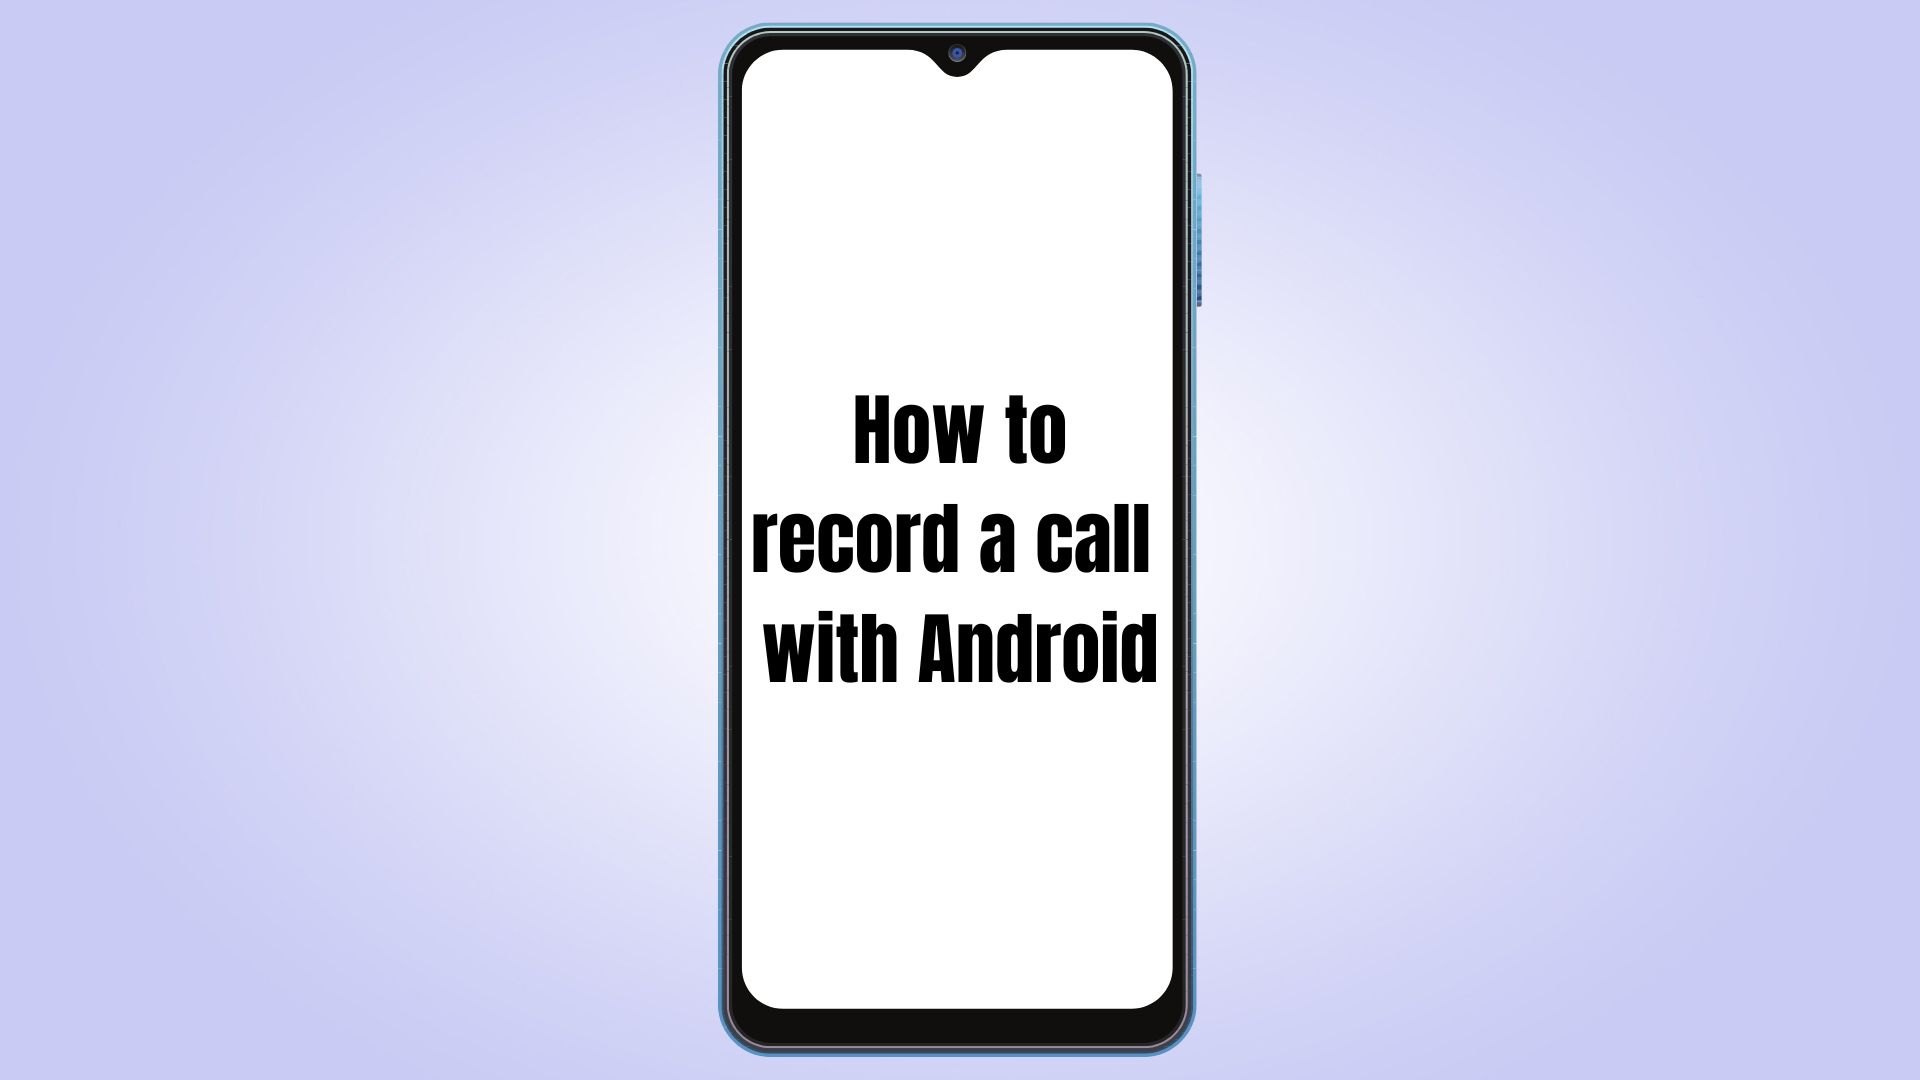 How to record a call with Android